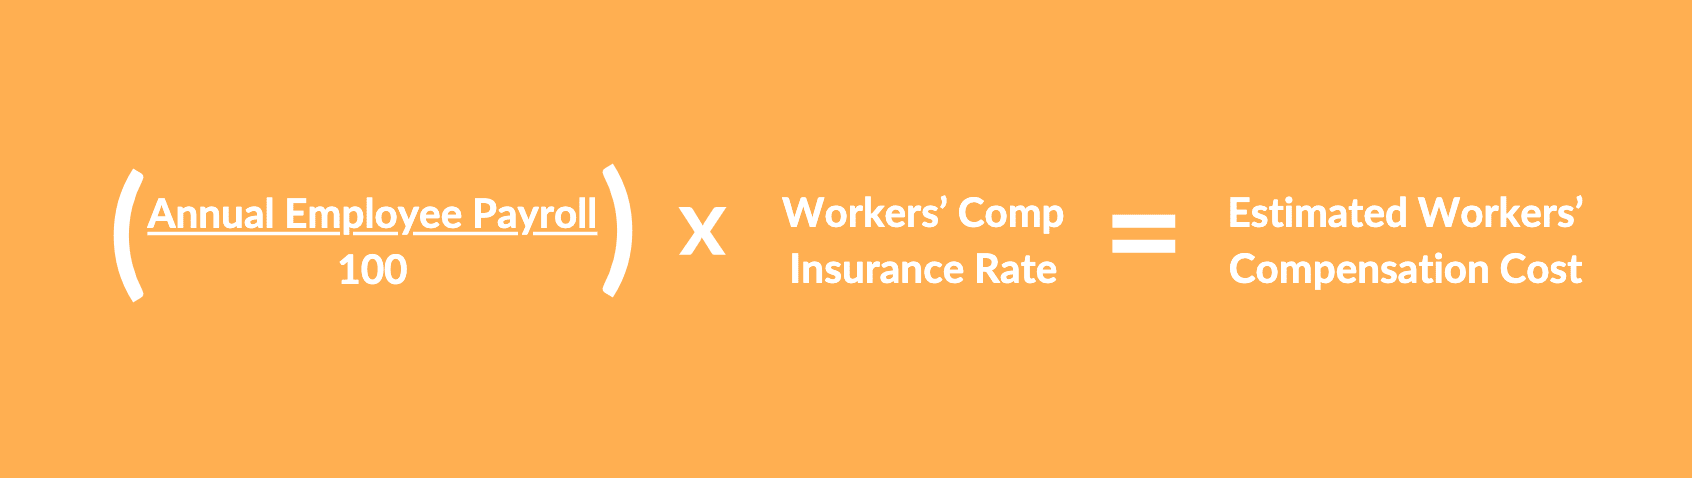 How to calculate workers compensation cost per employee